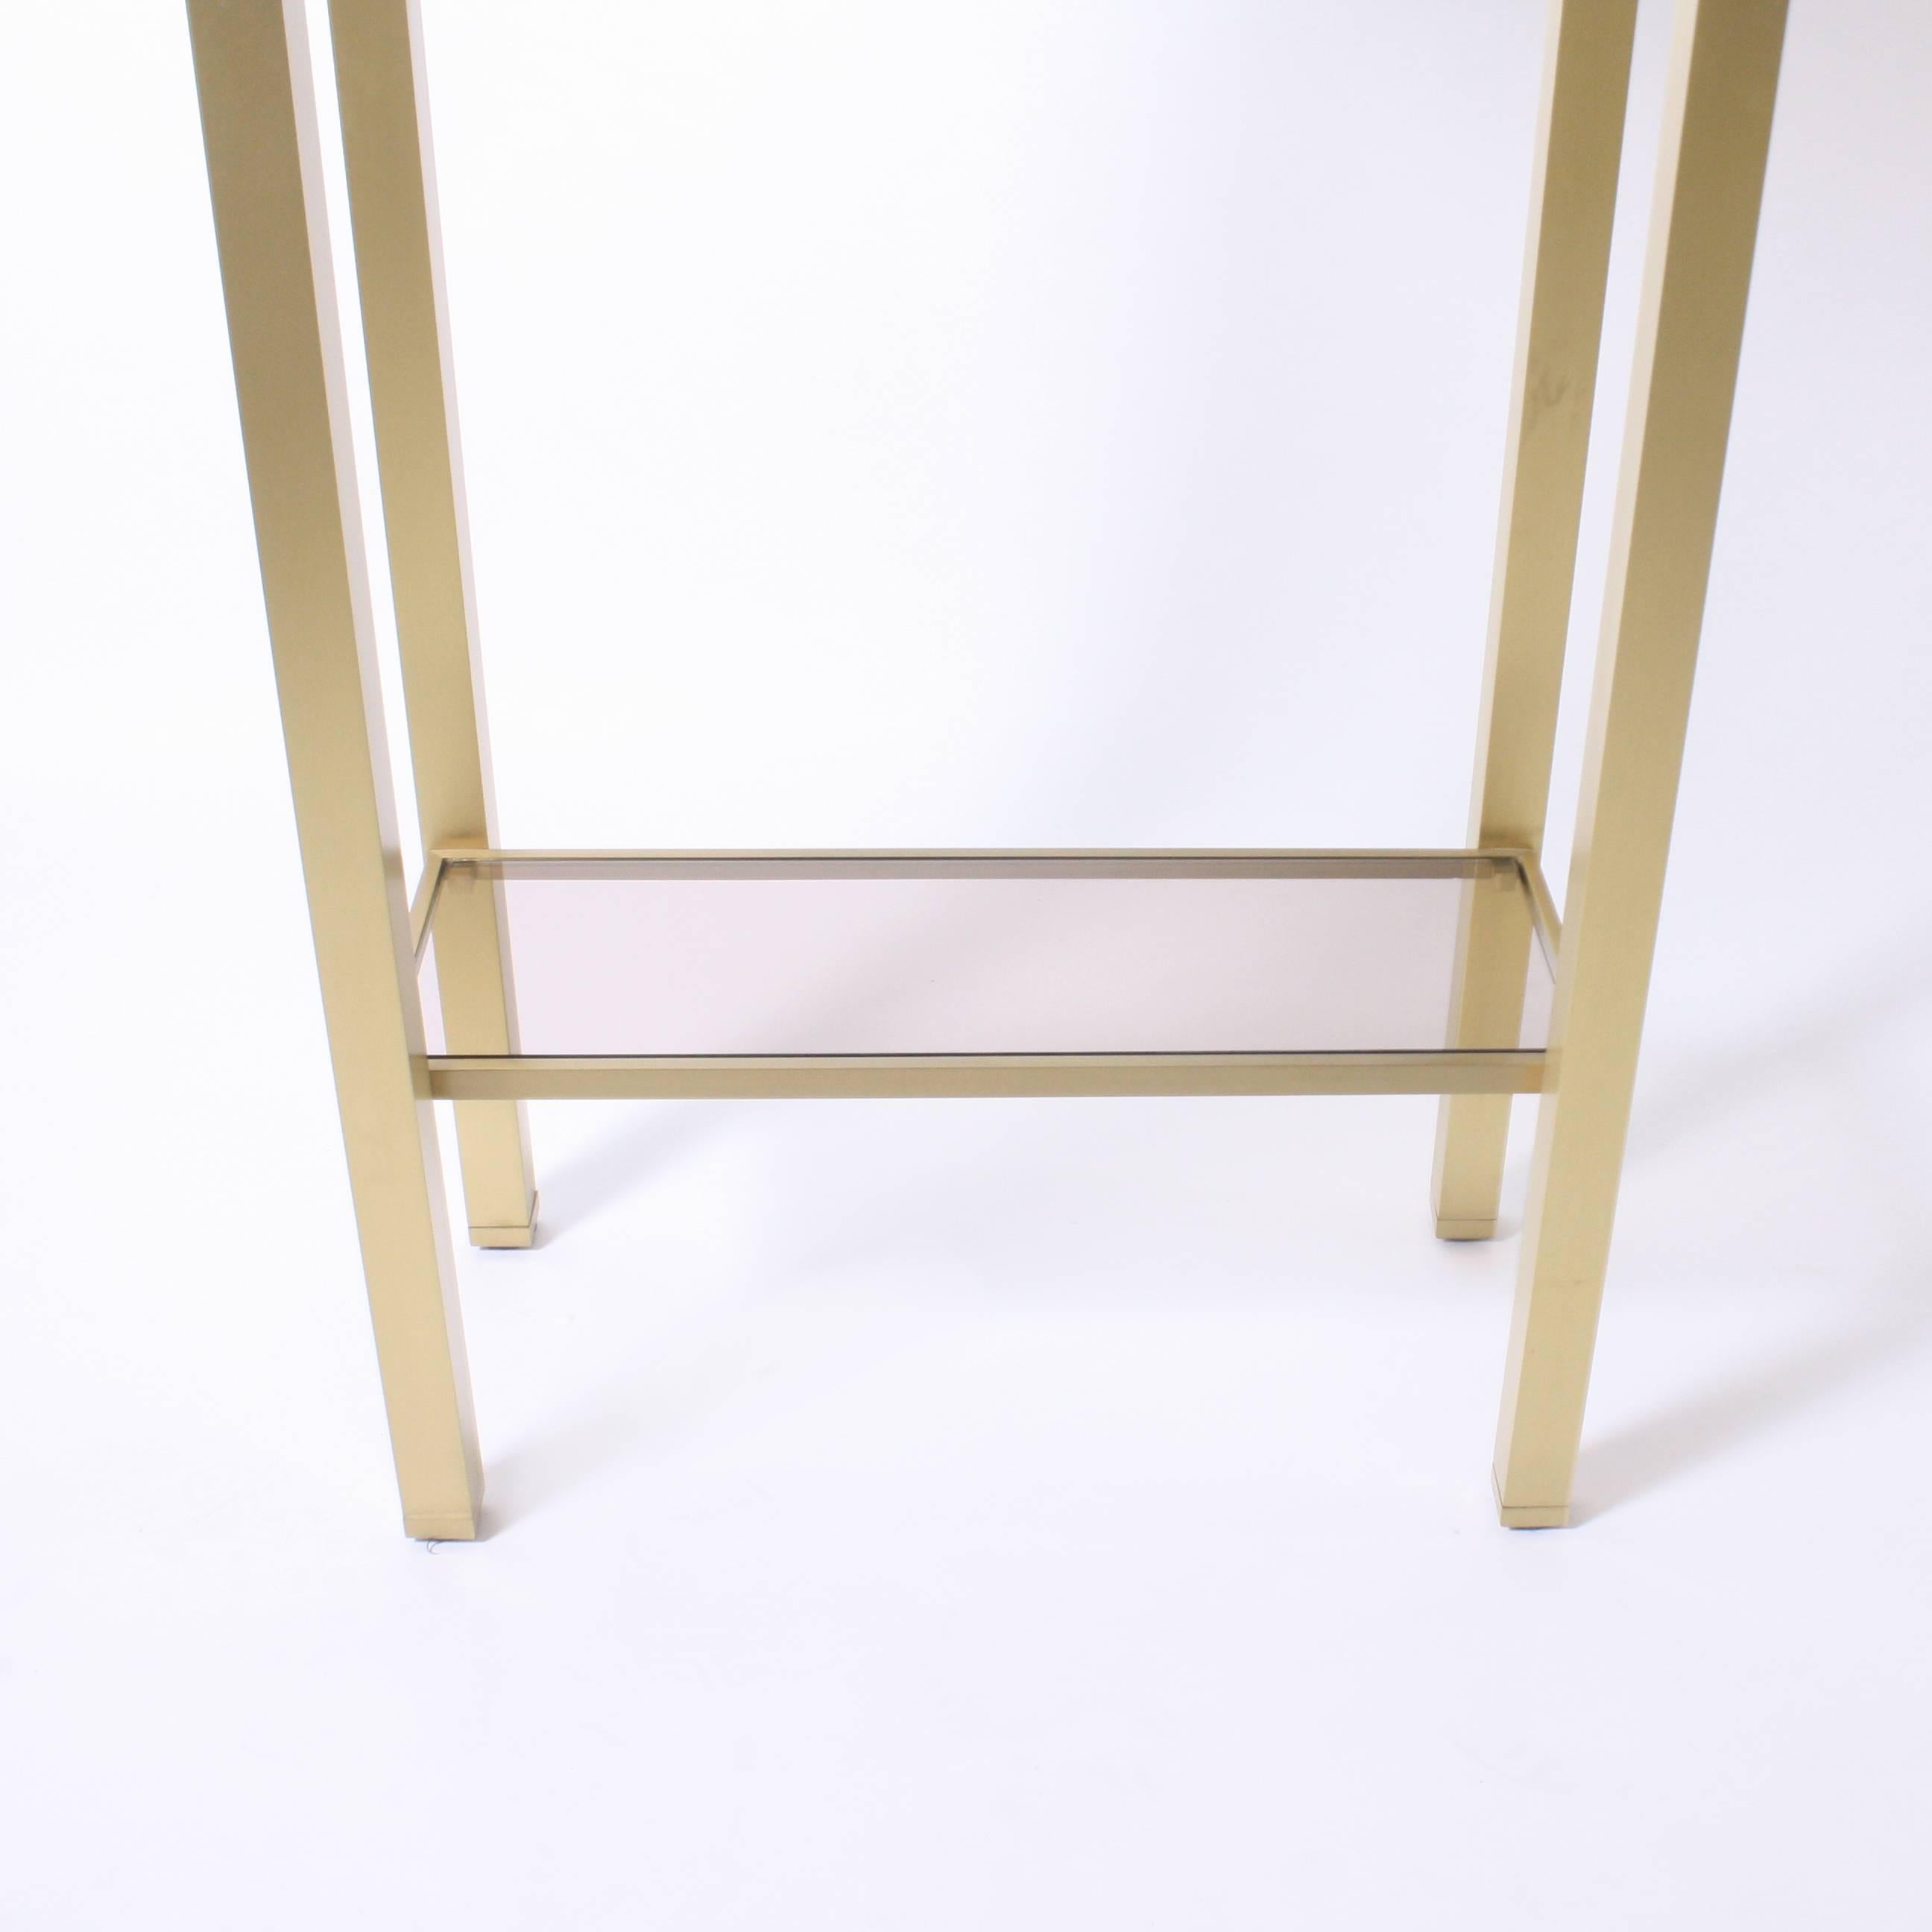 Late 20th Century Pair of brass pedestal tables by Guy Lefevre for Maison Jansen, circa 1970